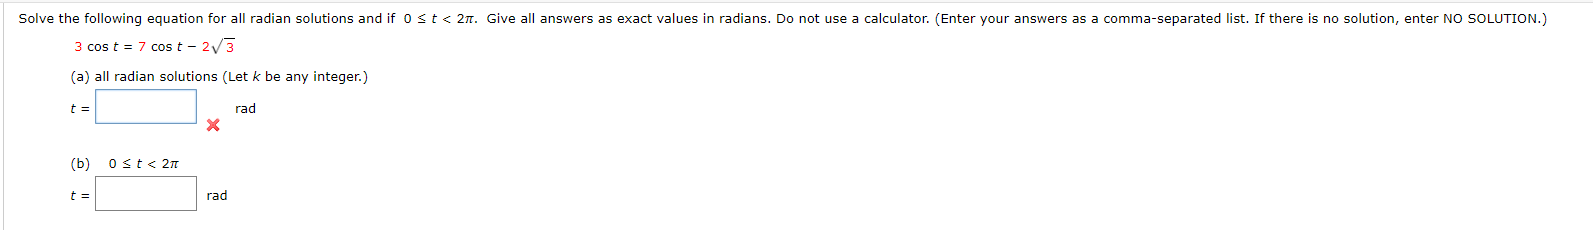 Solve the following equation for all radian solutions and if 0st< 2n. Give all answers as exact values in radians. Do not use a calculator. (E
3 cos t = 7 cos t - 2/3
(a) all radian solutions (Let k be any integer.)
t =
rad
(b)
0 st< 2n
t =
rad
